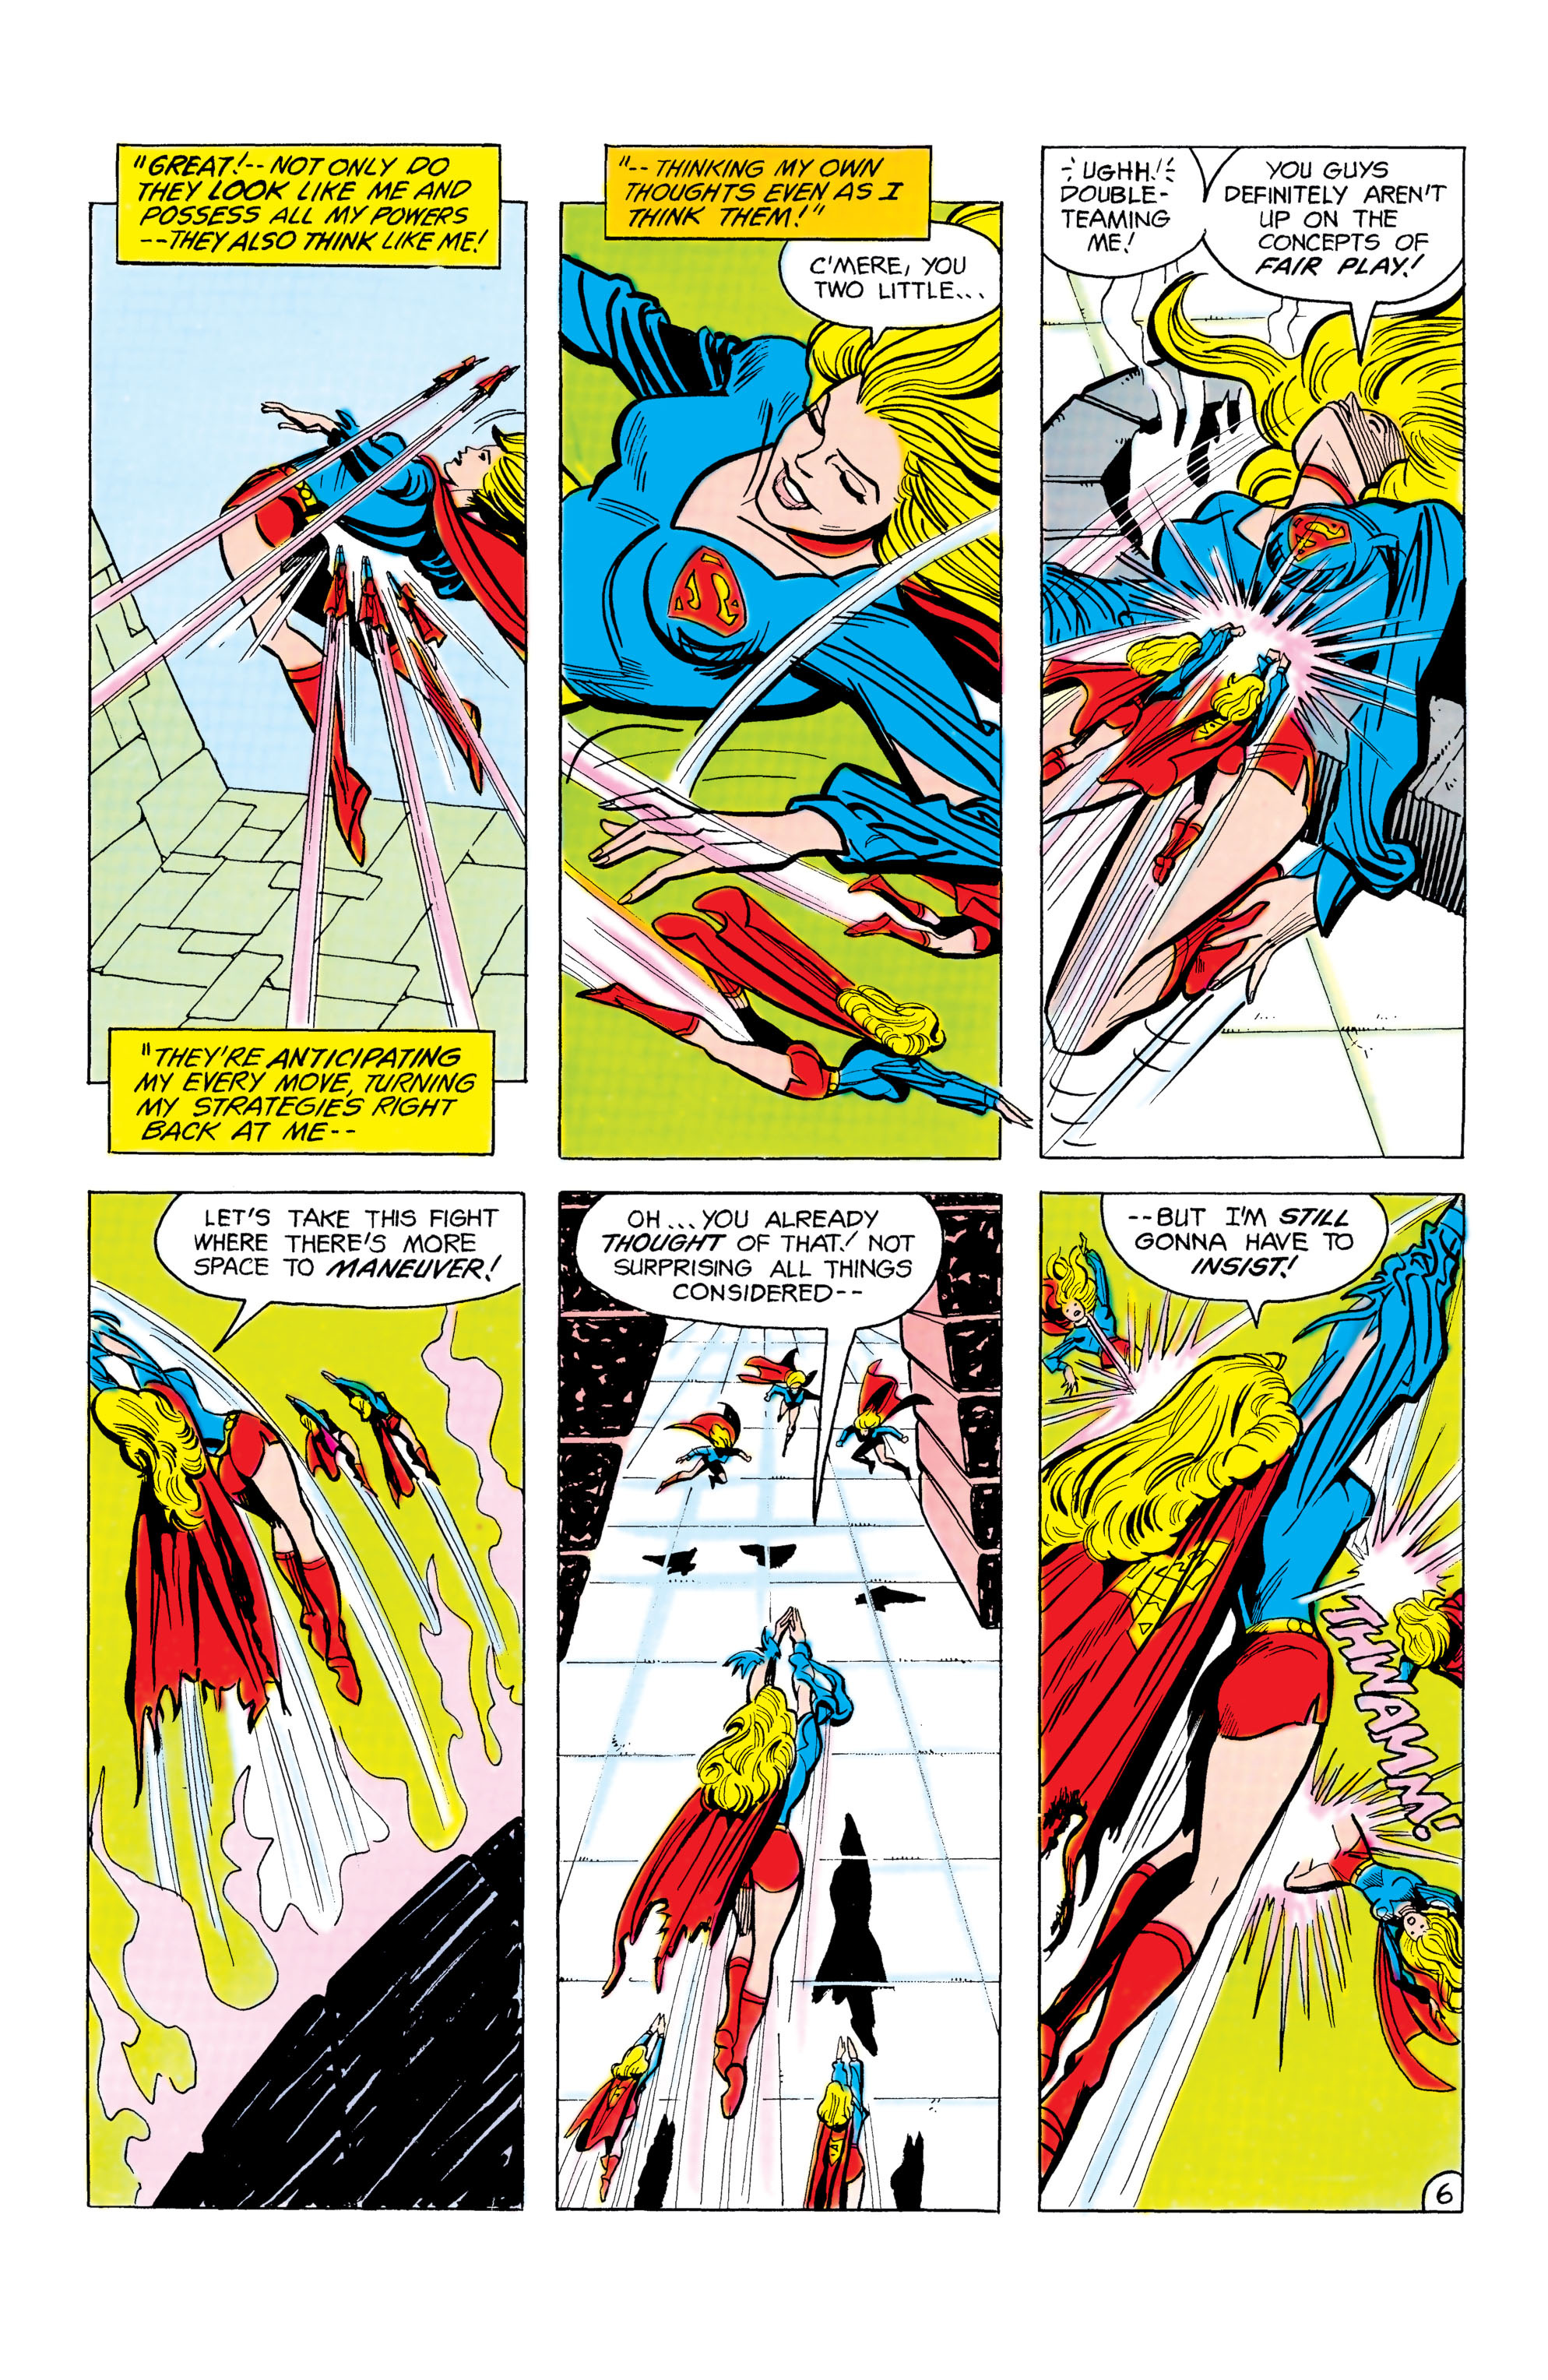 Supergirl (1982) 12 Page 6